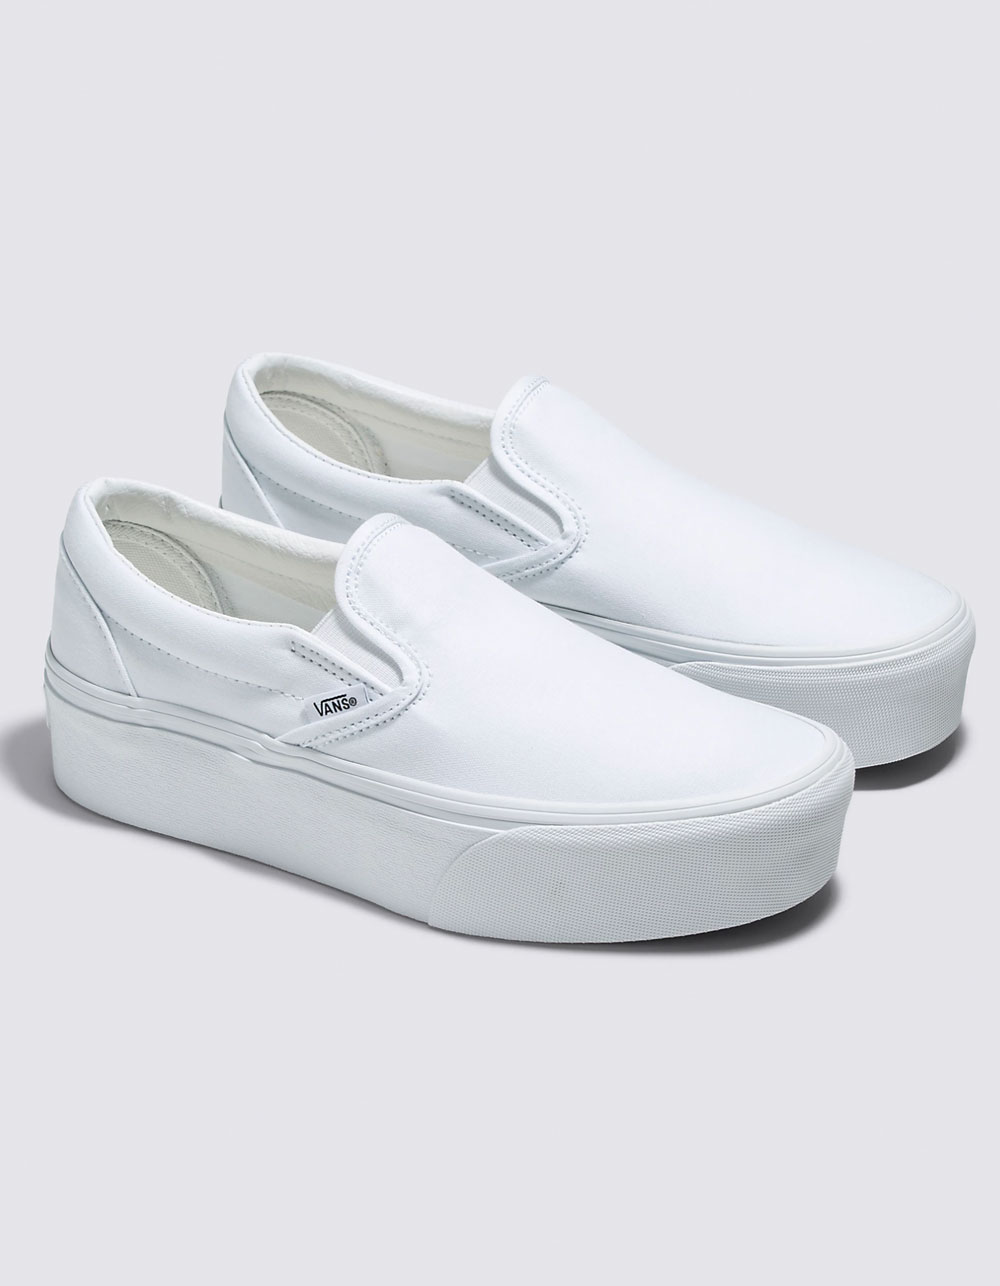 VANS Classic Slip-On Stackform Womens Shoes - WHITE